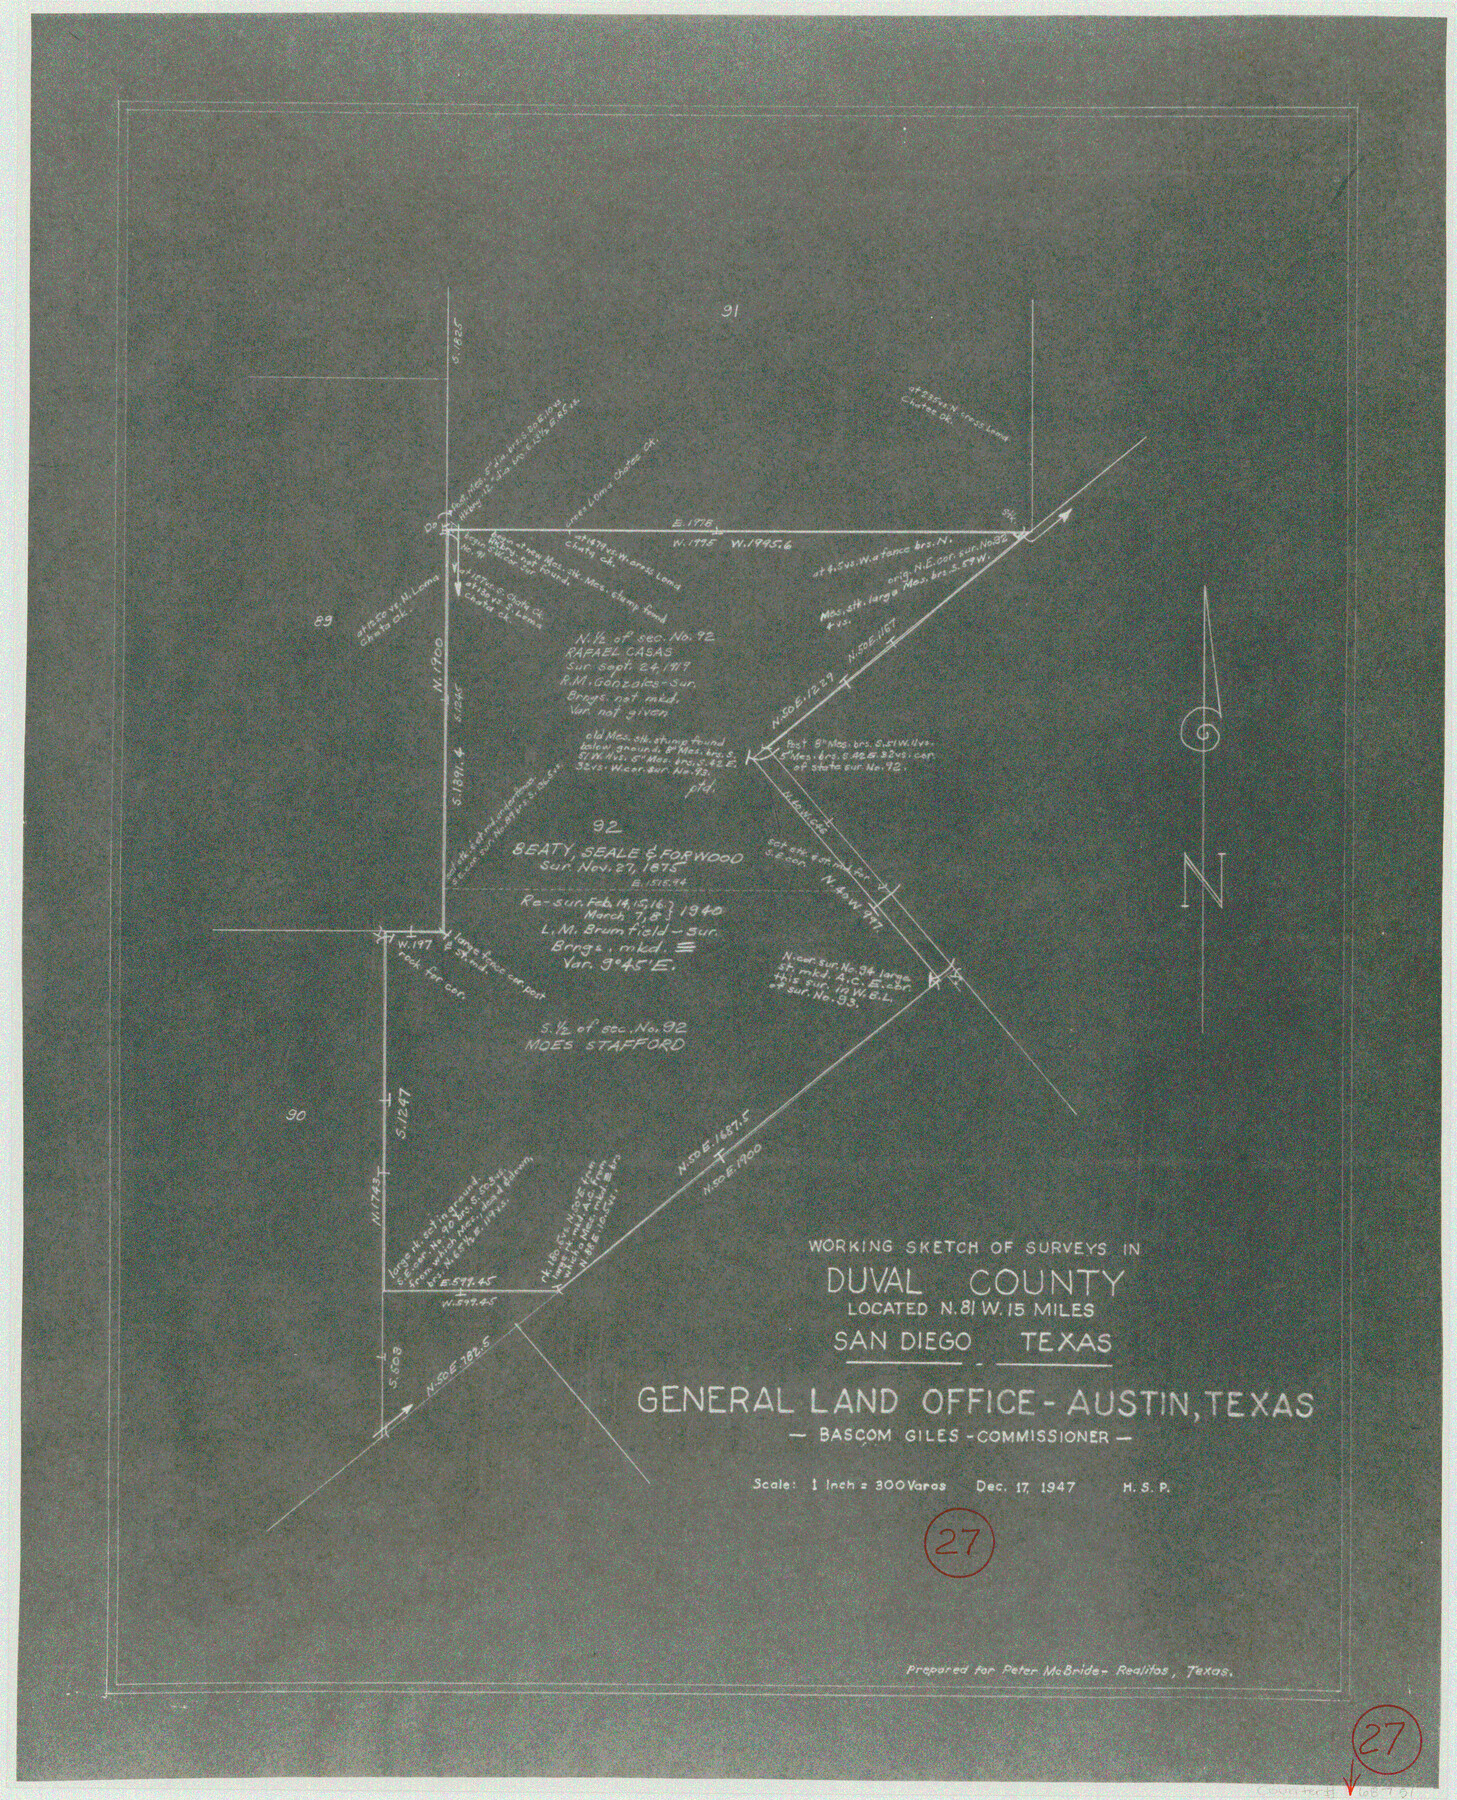 68751, Duval County Working Sketch 27, General Map Collection